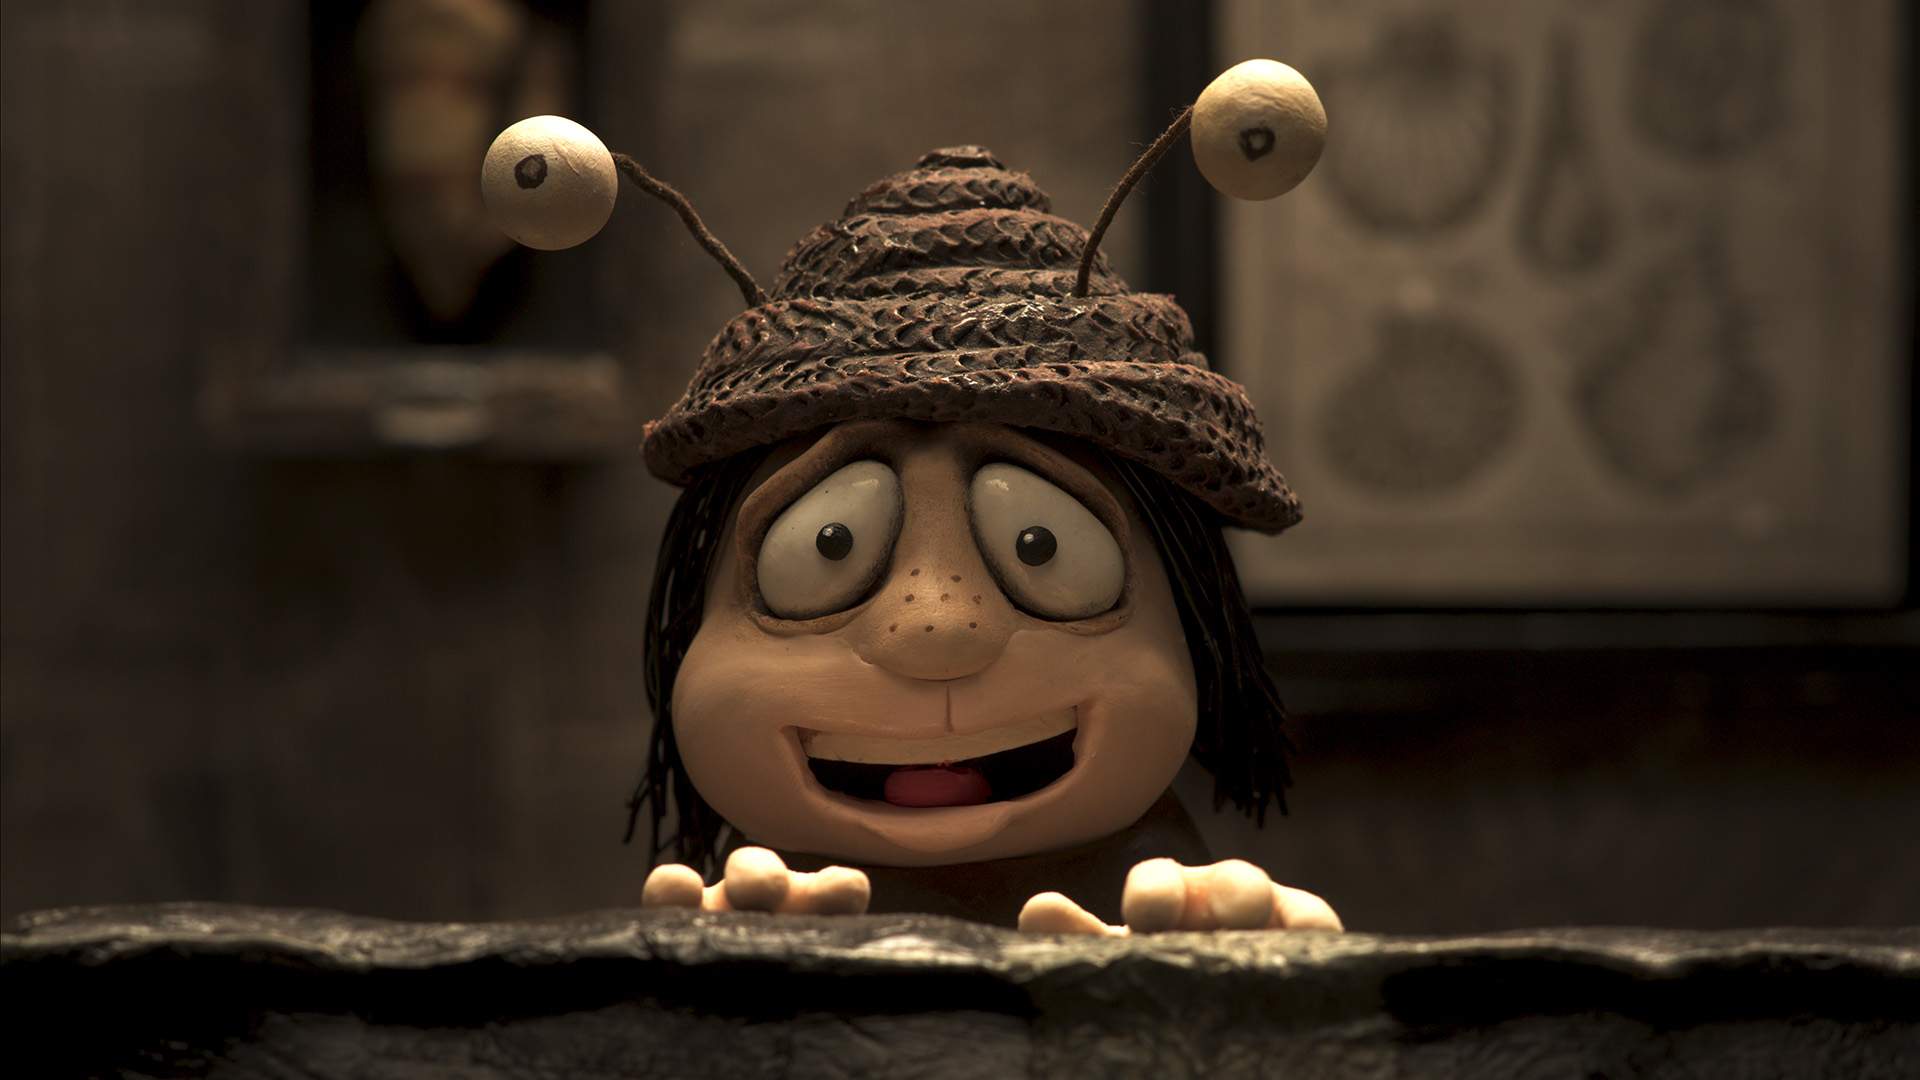 The First Trailer for Adam Elliot's 'Memoir of a Snail' Is Here with a Stellar Sarah Snook-Led Voice Cast